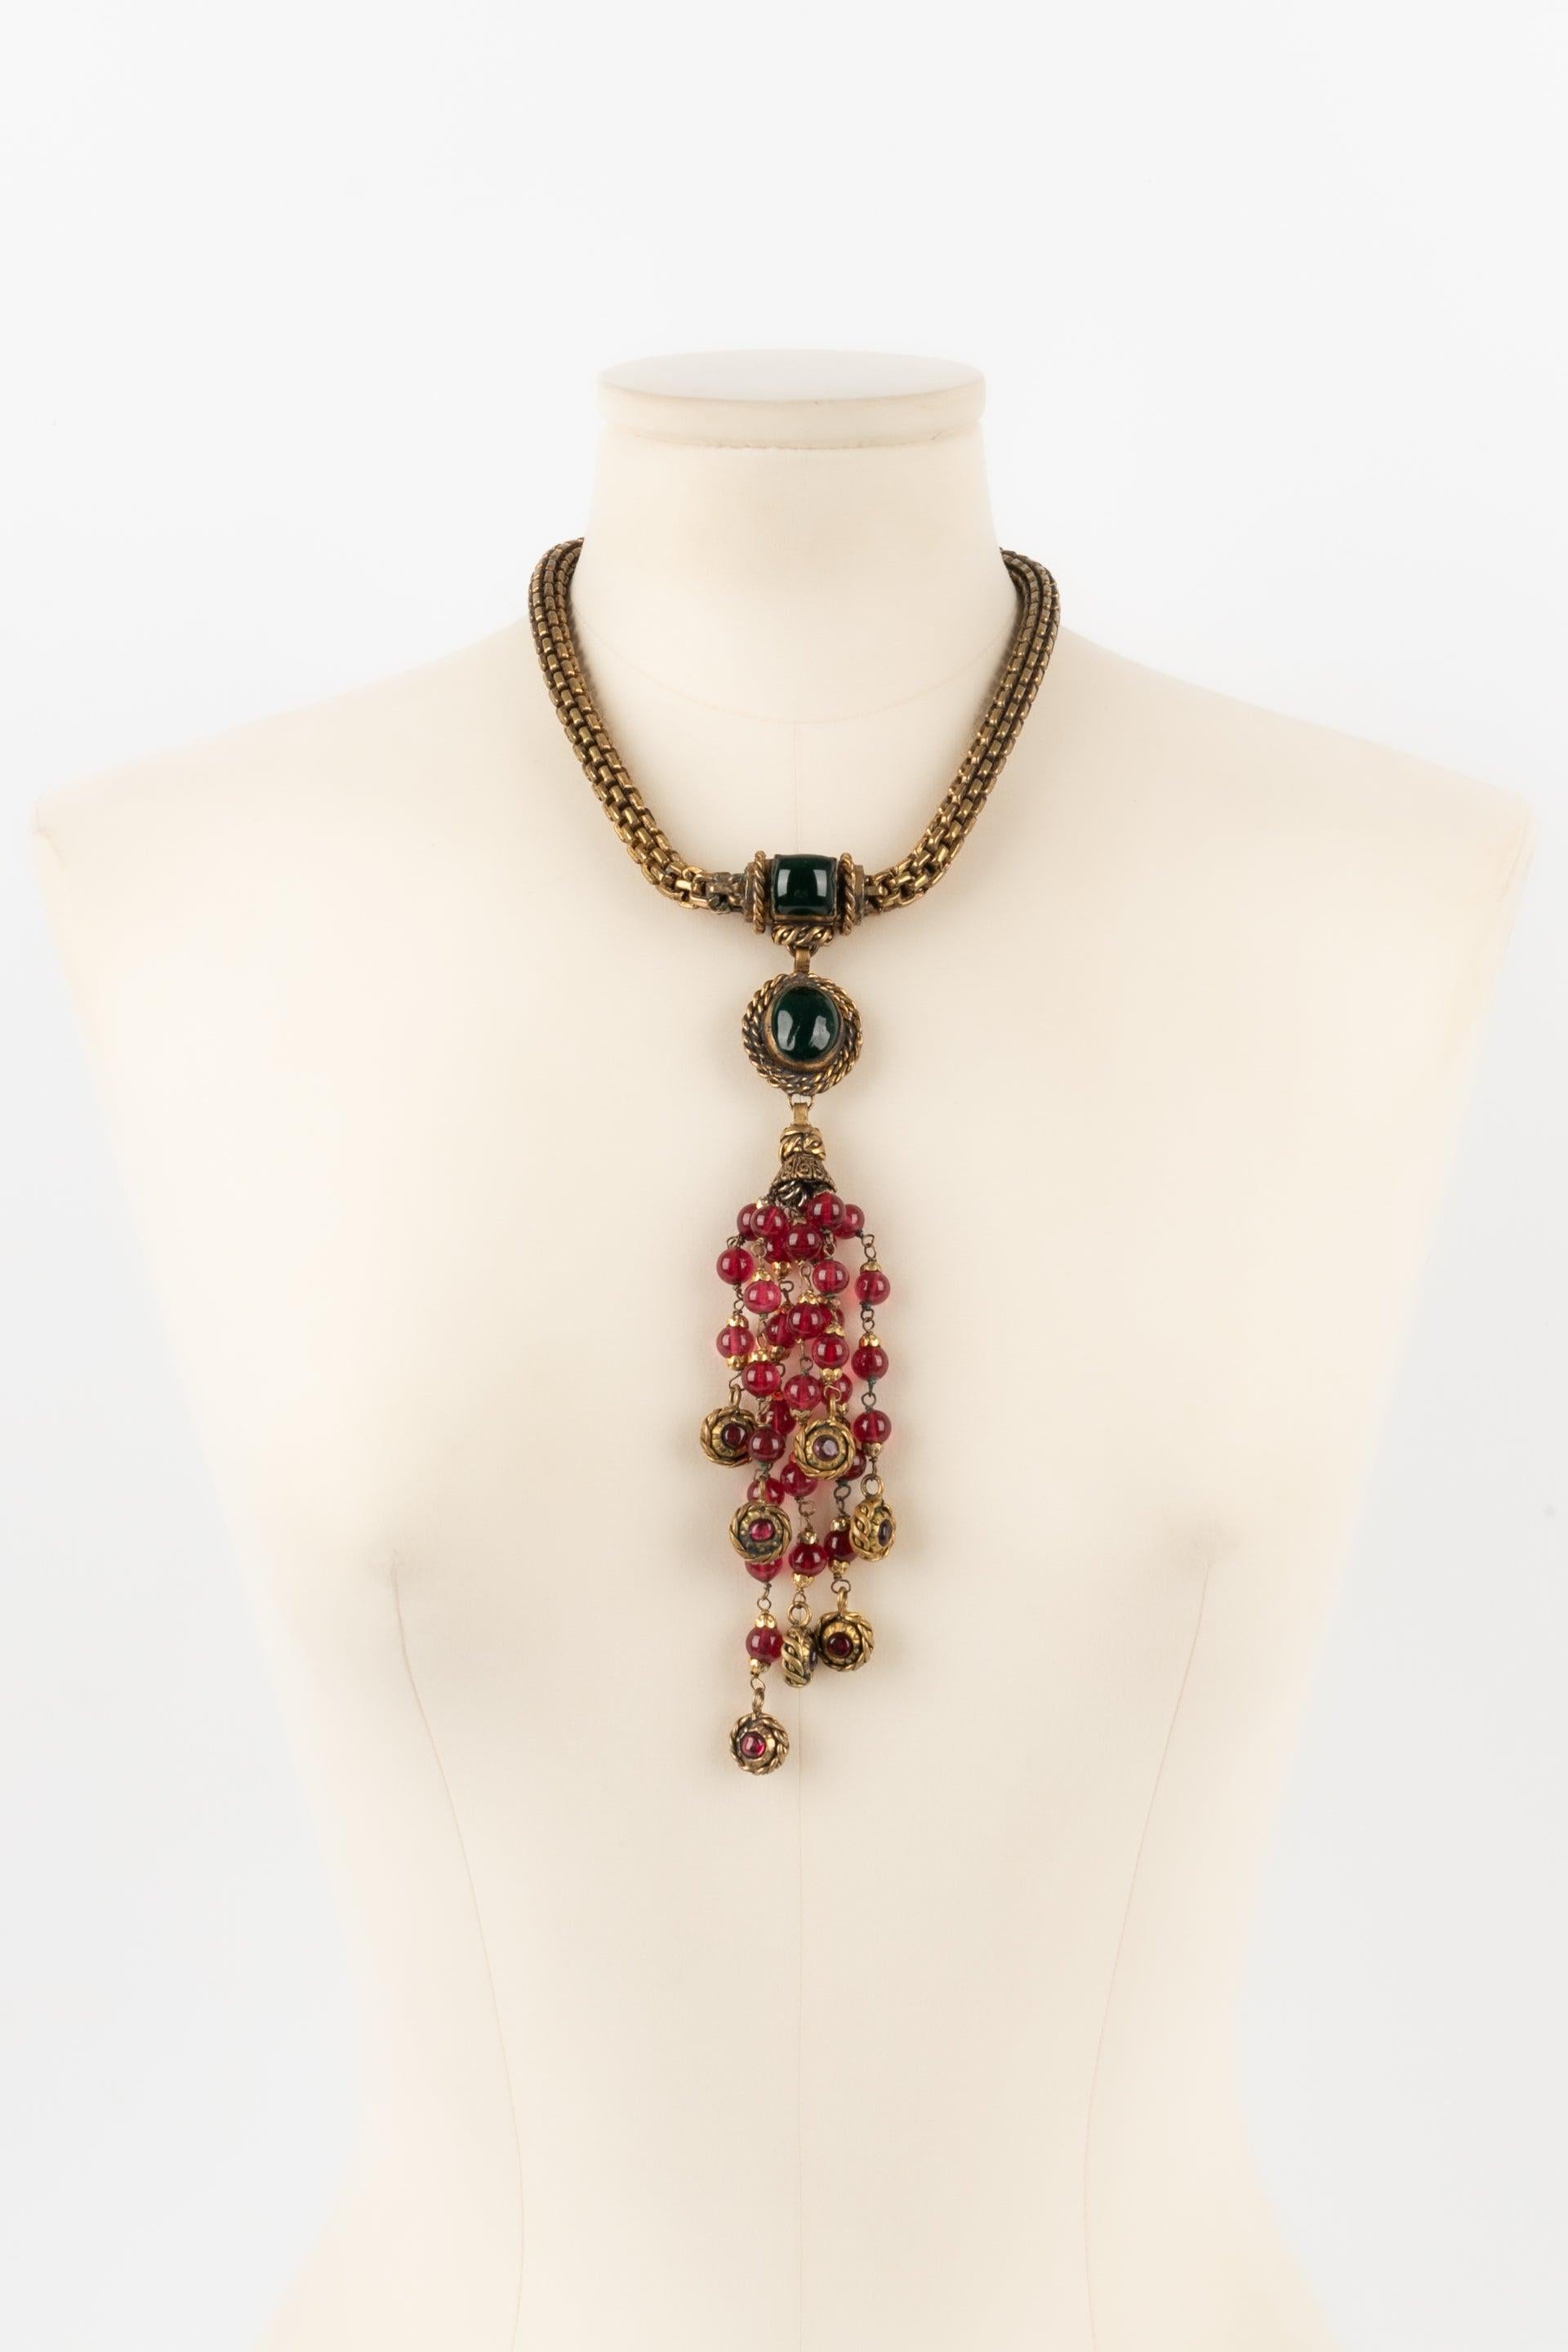 Chanel - Glass paste and dark-golden metal necklace. 1984 Collection.

Additional information:
Condition: Good condition
Dimensions: Length: 44 cm
Period: 20th Century

Seller Reference: CB89
